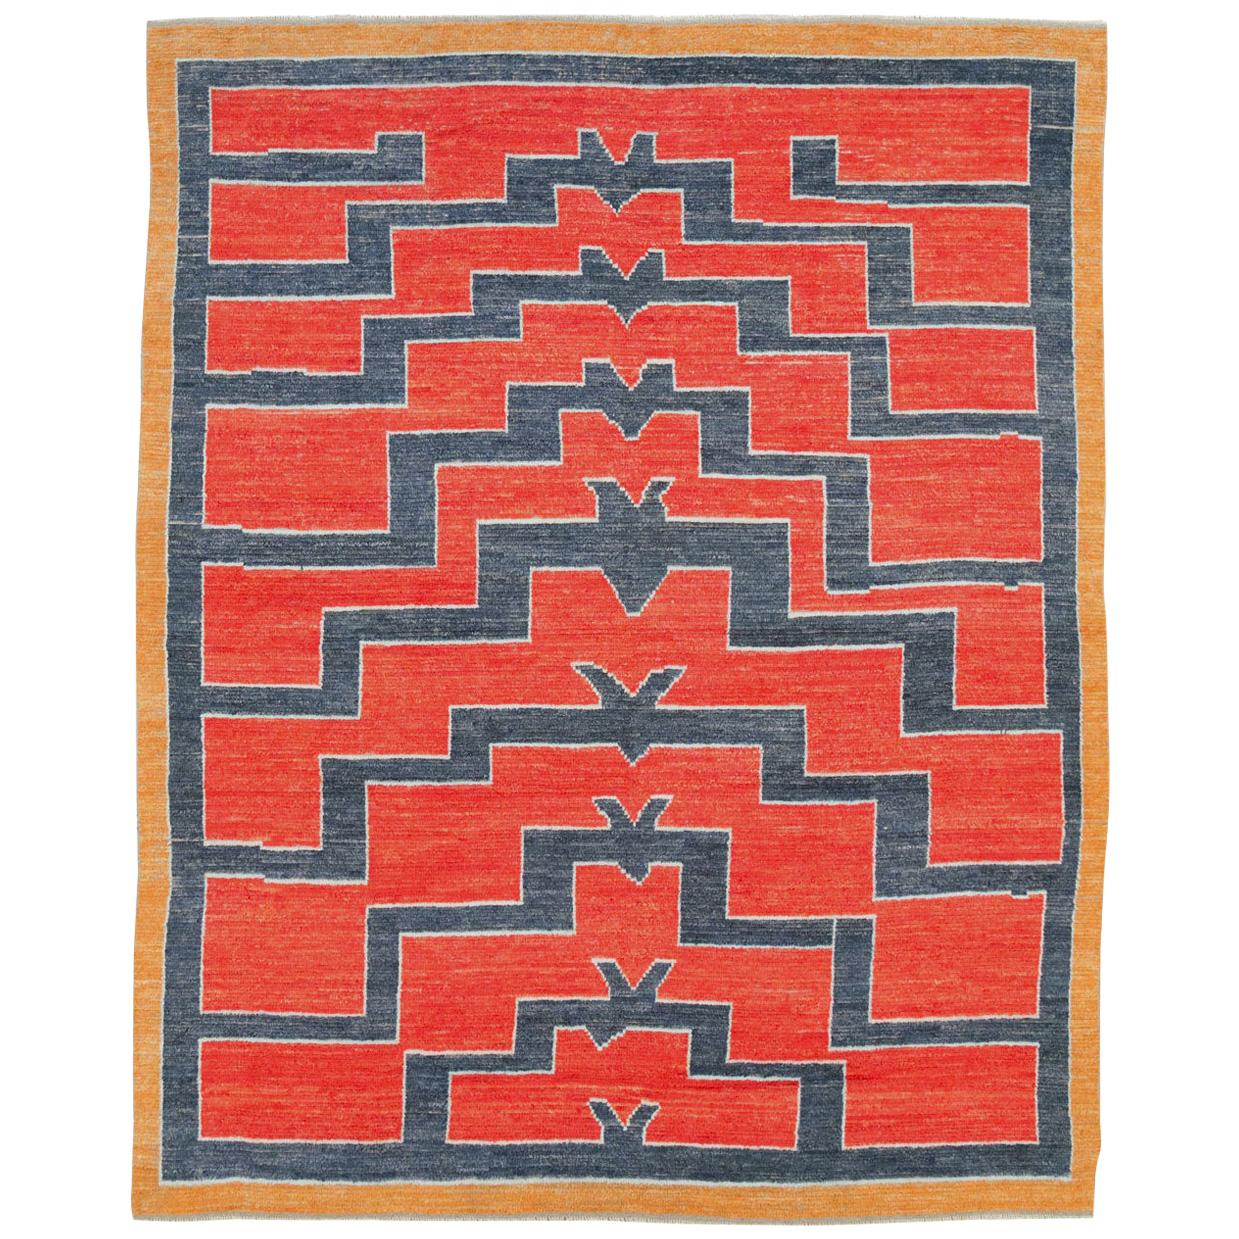 Contemporary Handmade Turkish Tulu Shag Large Room Size Rug in Rust Red